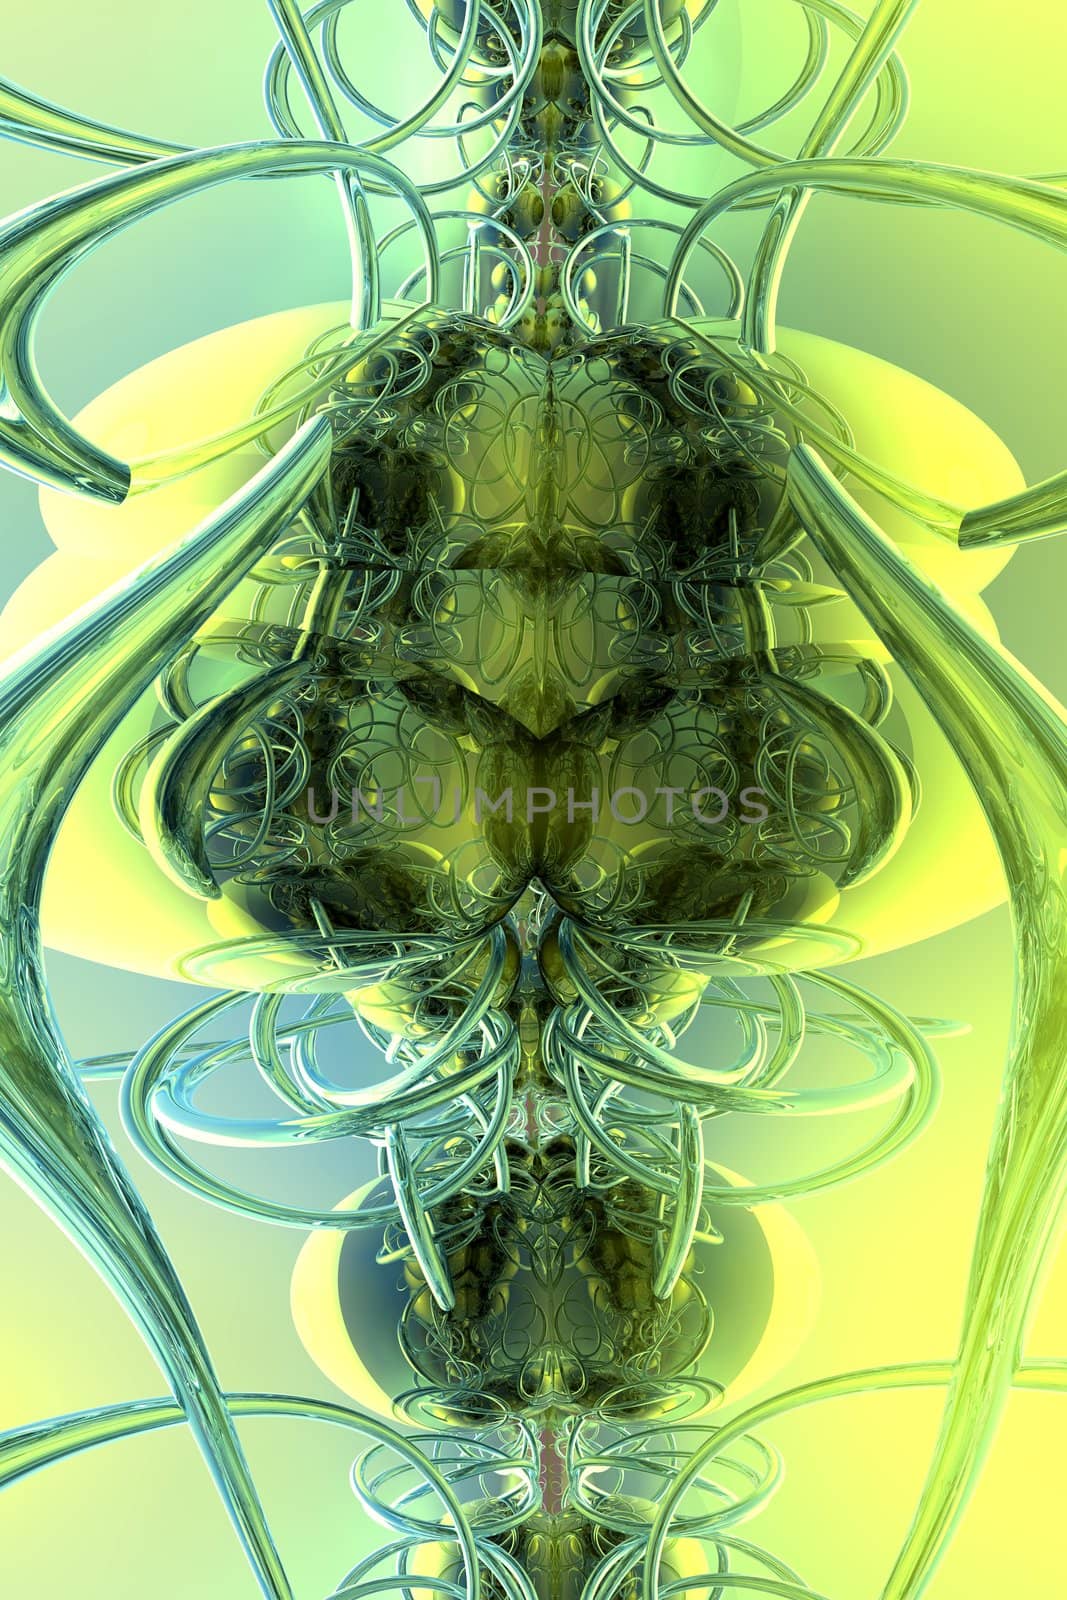 Abstract 3D illustration of a Grasshopper/Insect like Form.
